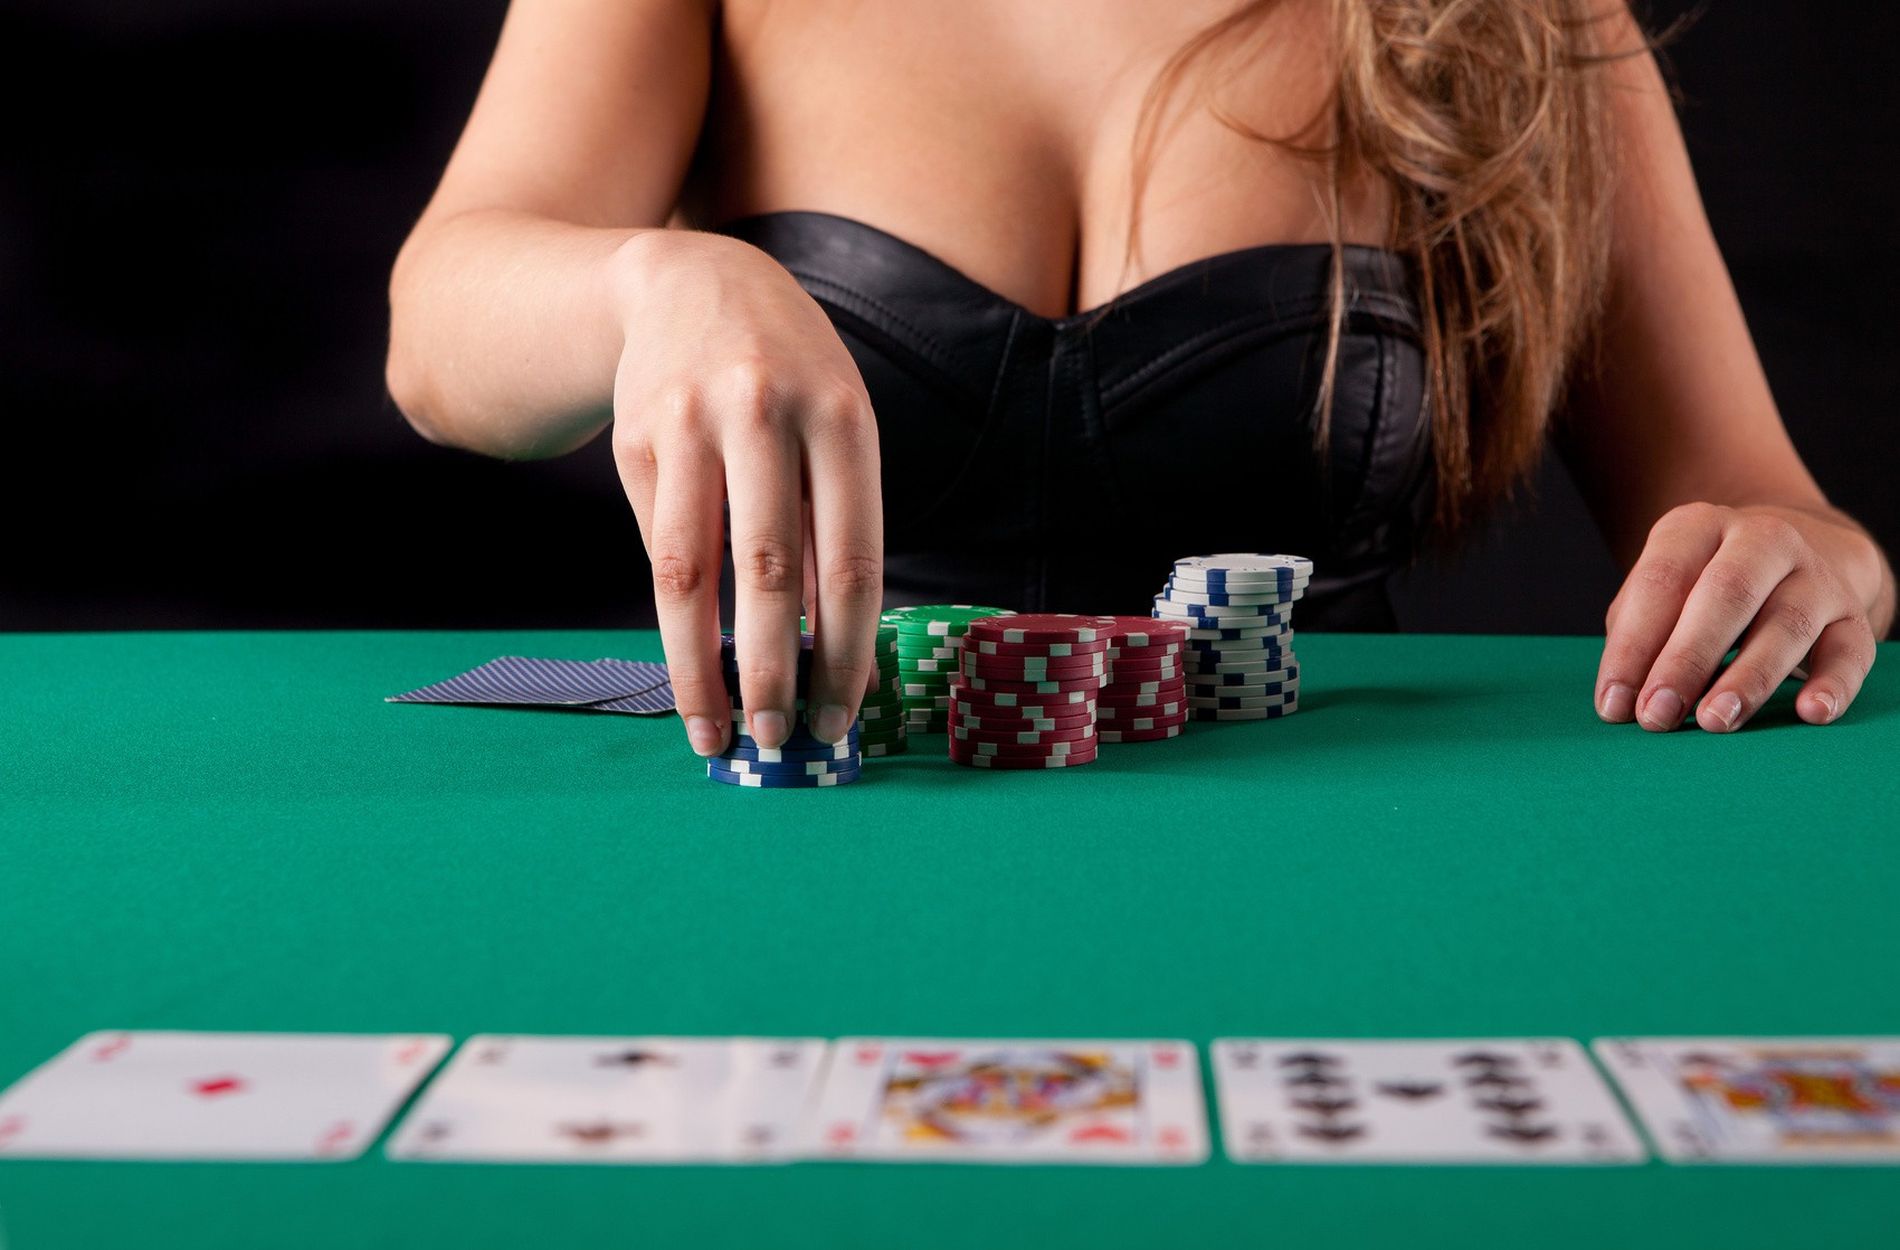 How To Display Your Online Casino From Zero To Hero